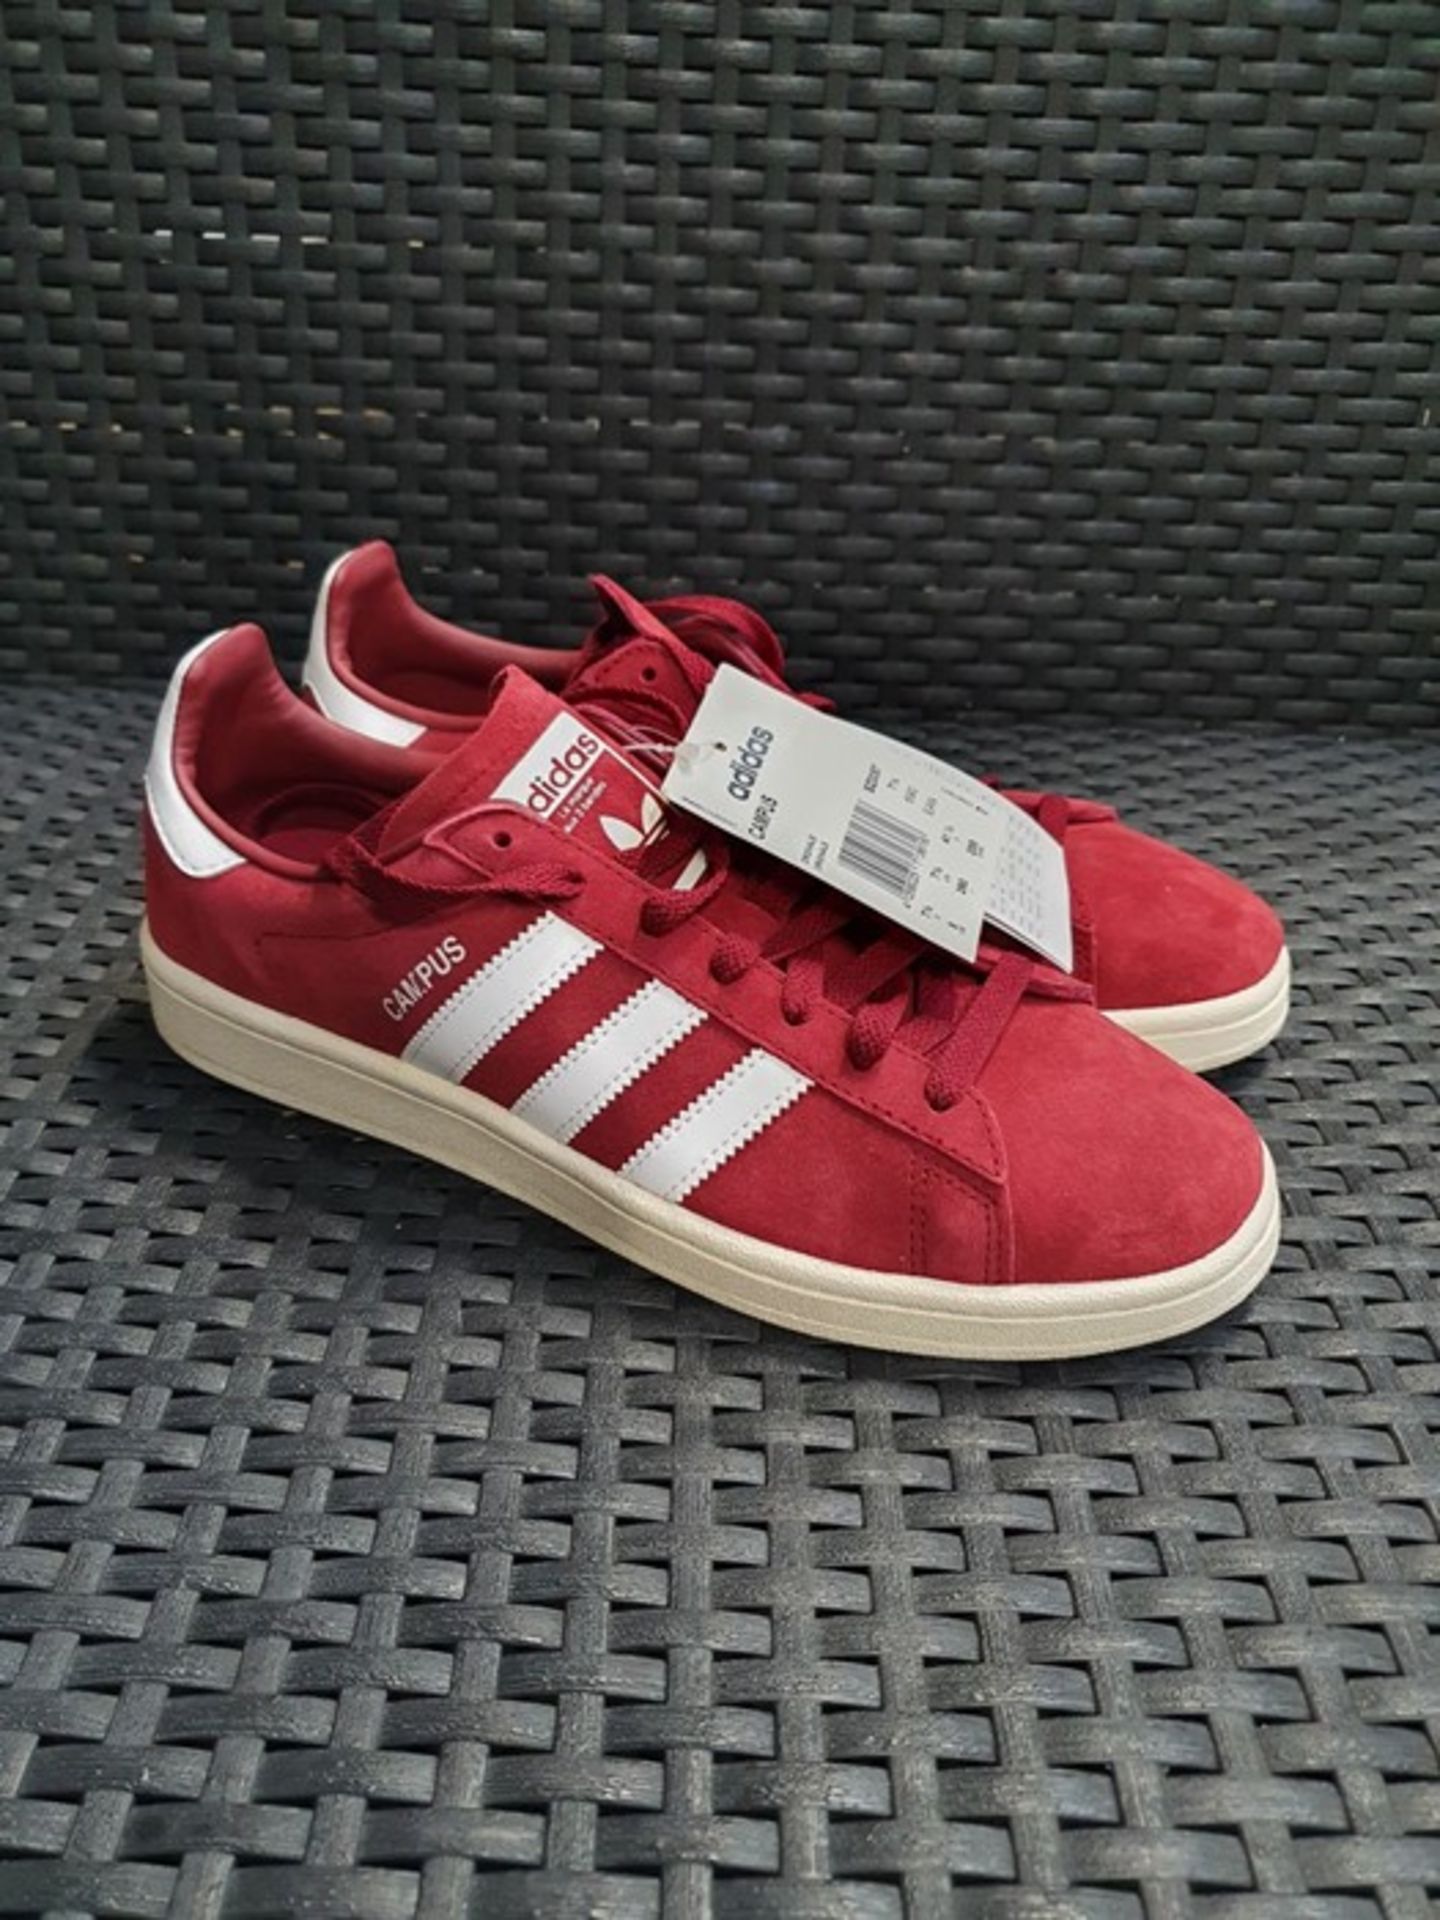 ONE PAIR OF ADIDAS CAMPUS SUEDE TRAINERS IN BURGUNDY/WHITE - SIZE 7.5 UK. RRP £80.00 GRADE A * -